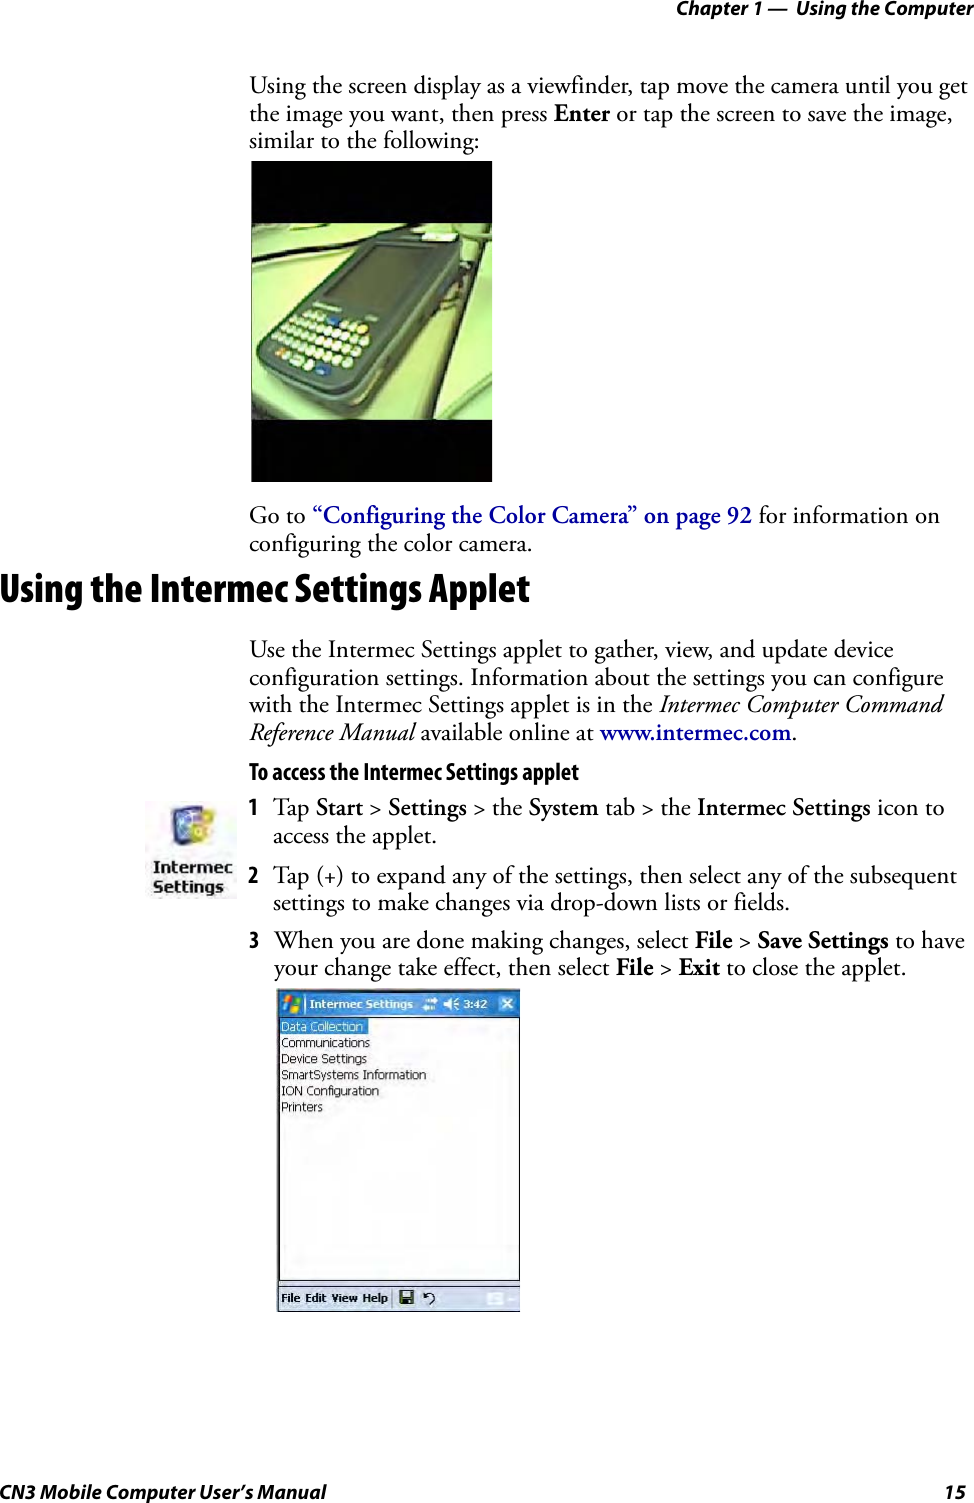 Chapter 1 —  Using the ComputerCN3 Mobile Computer User’s Manual 15Using the screen display as a viewfinder, tap move the camera until you get the image you want, then press Enter or tap the screen to save the image, similar to the following:Go to “Configuring the Color Camera” on page 92 for information on configuring the color camera.Using the Intermec Settings AppletUse the Intermec Settings applet to gather, view, and update device configuration settings. Information about the settings you can configure with the Intermec Settings applet is in the Intermec Computer Command Reference Manual available online at www.intermec.com.To access the Intermec Settings applet3When you are done making changes, select File &gt; Save Settings to have your change take effect, then select File &gt; Exit to close the applet.1Tap Start &gt; Settings &gt; the System tab &gt; the Intermec Settings icon to access the applet. 2Tap (+) to expand any of the settings, then select any of the subsequent settings to make changes via drop-down lists or fields.